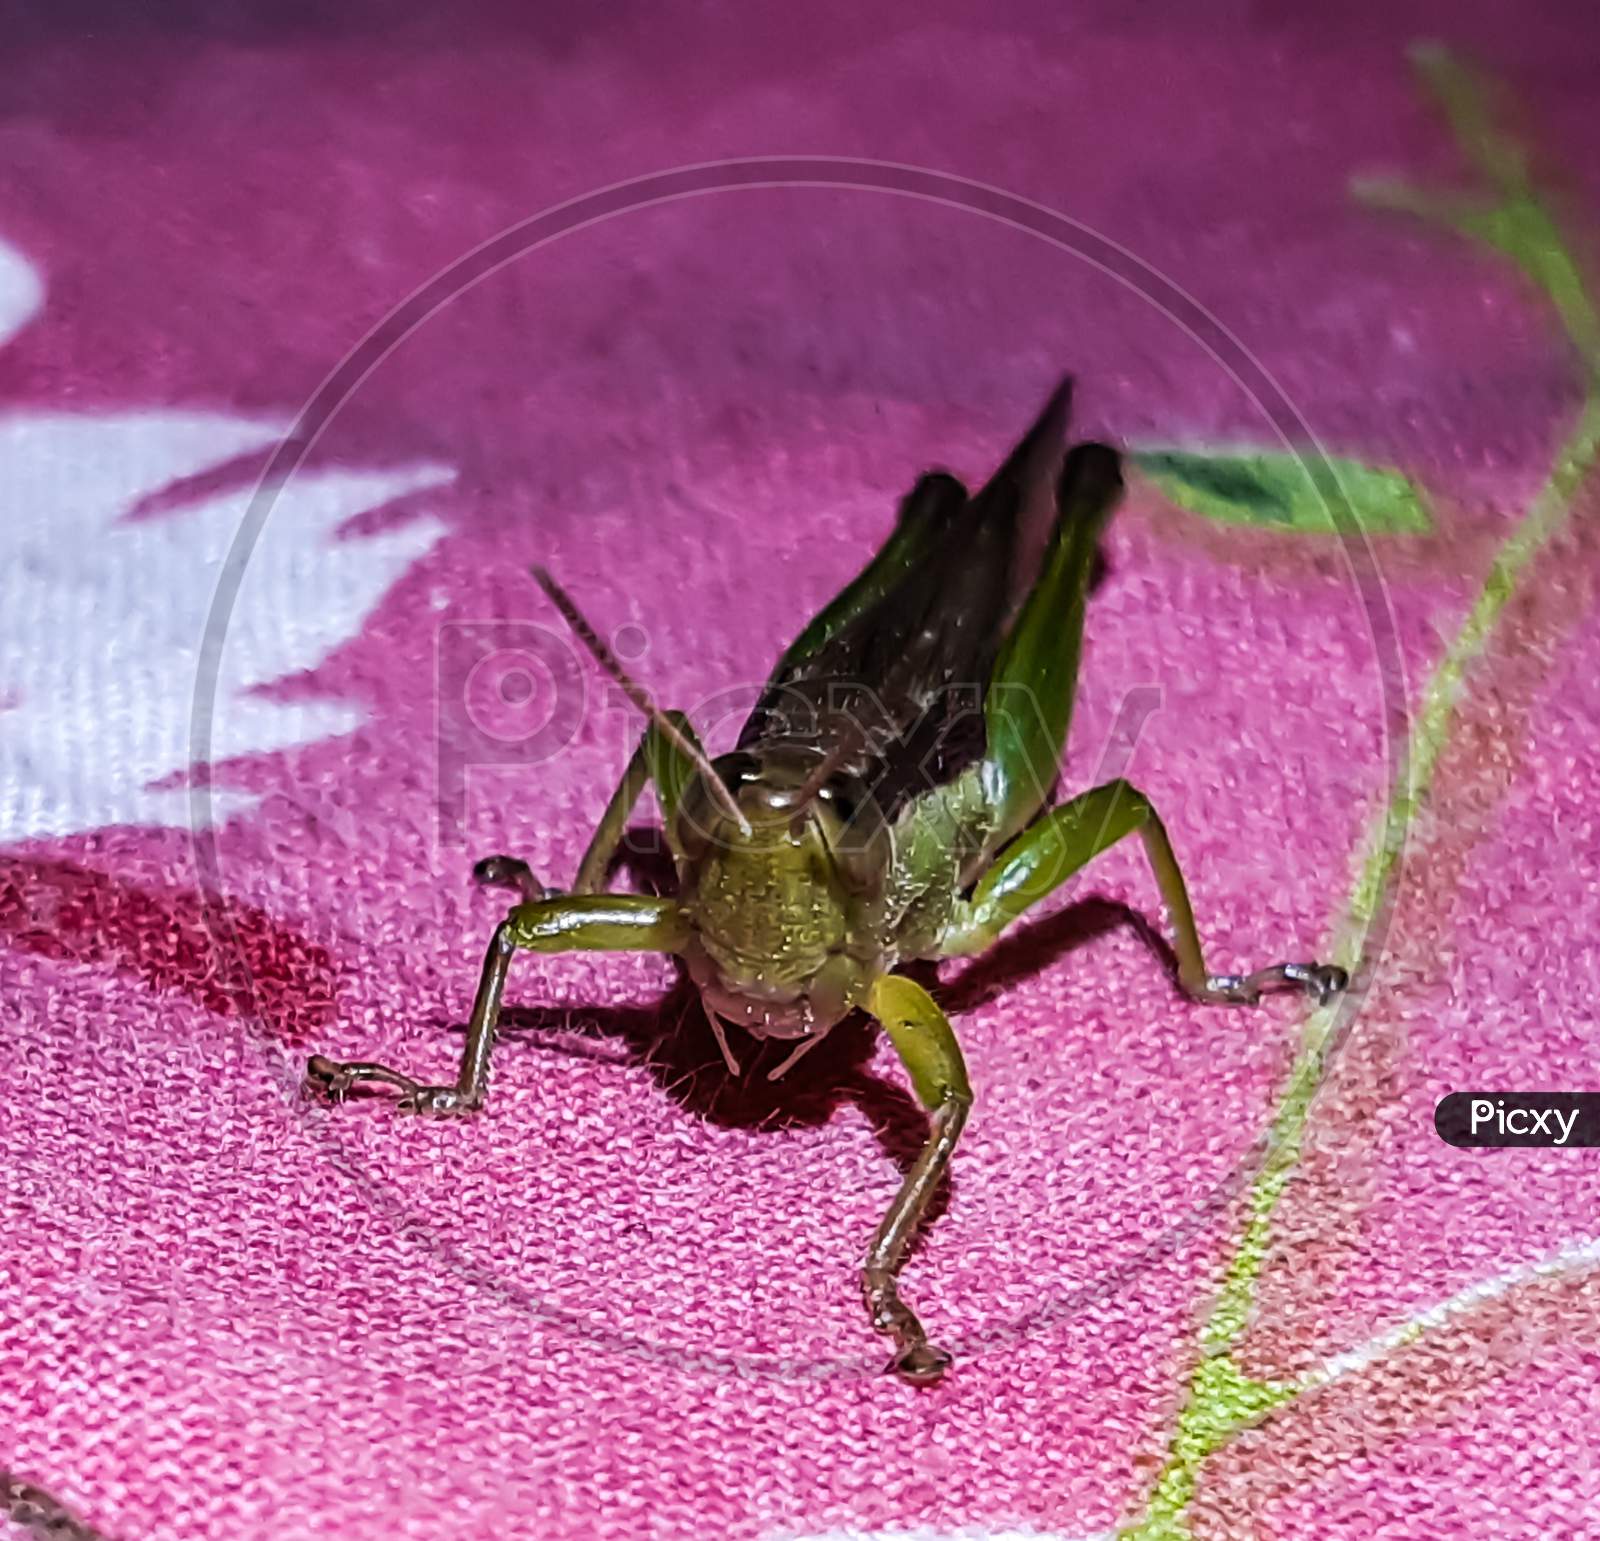 A Locust Is Sitting Under The Light On A Colorful Cloth.